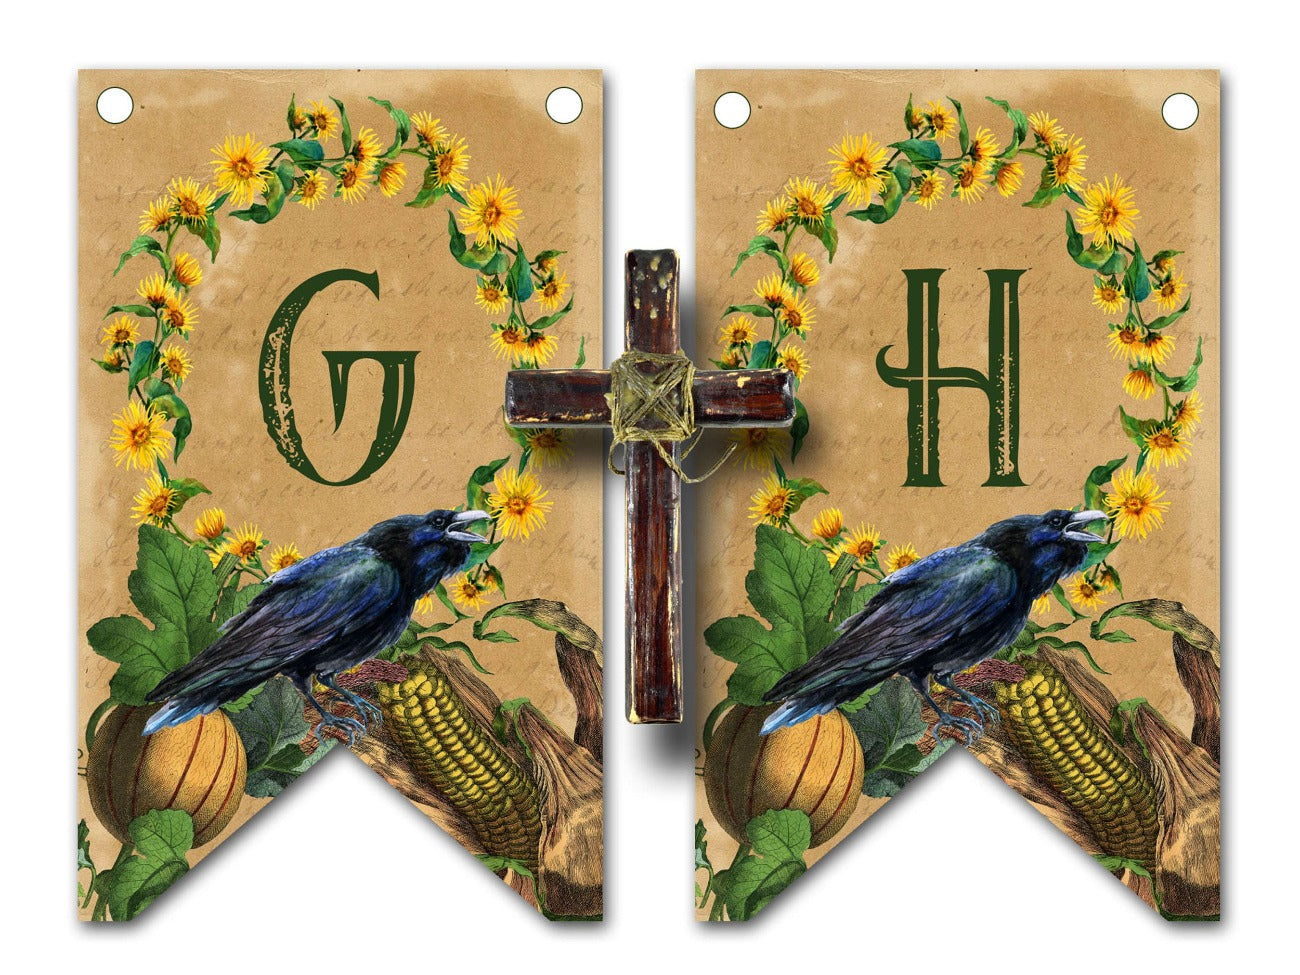 LUGHNASADH BANNER Bunting, Lughnasadh Flags Decoration with Raven and sunflowers on a parchment background.